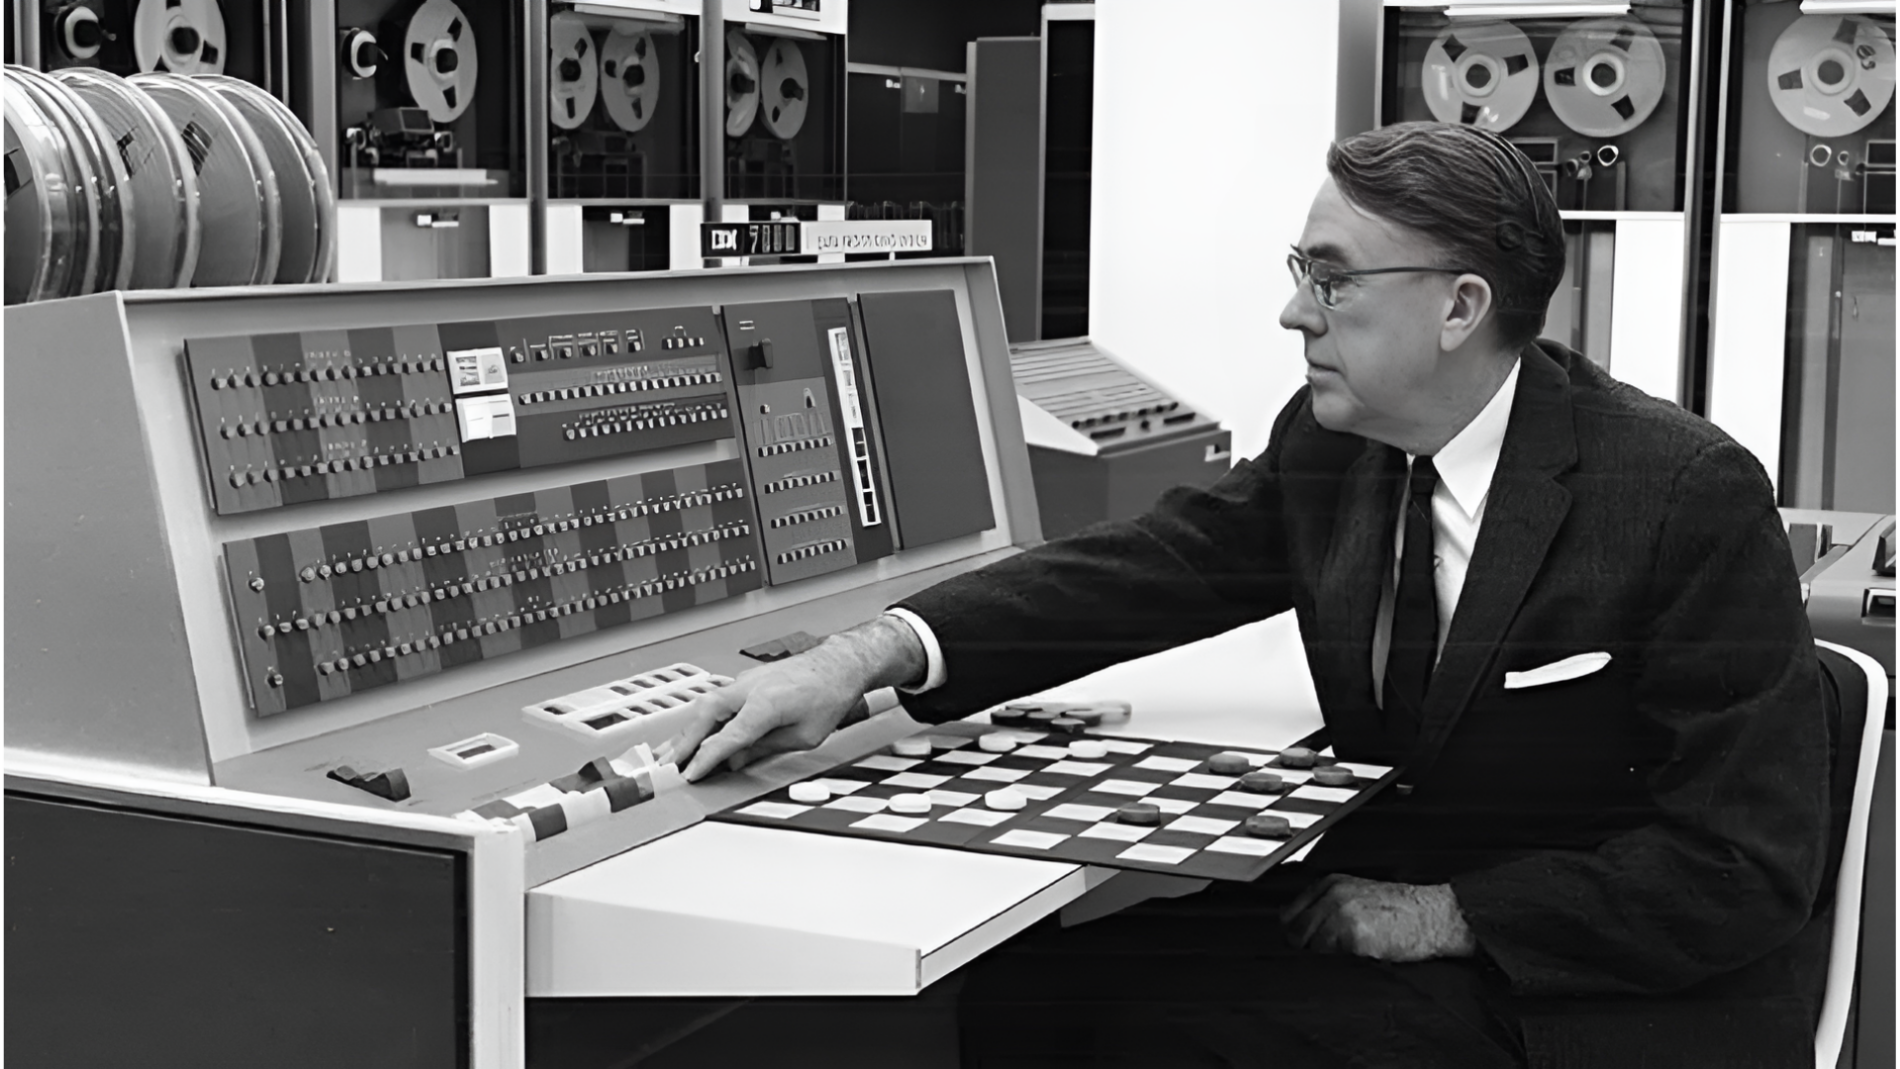 Arthur Samuel in a suit operating his Checkers programme onan early mainframe computer with reel-to-reel tape drives in the background.